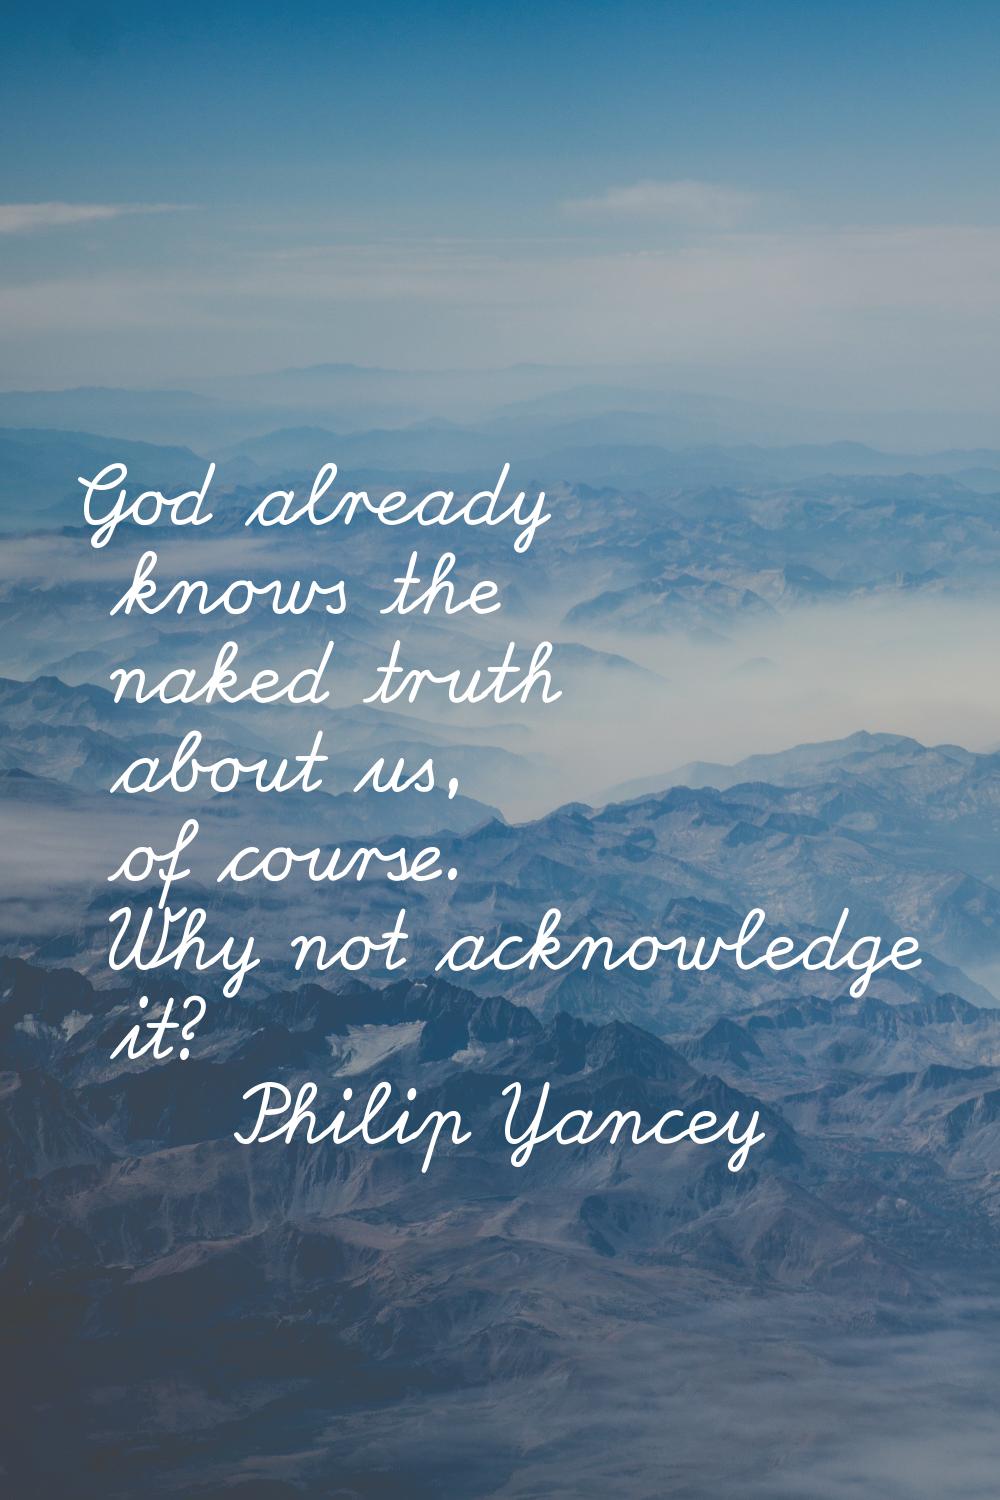 God already knows the naked truth about us, of course. Why not acknowledge it?